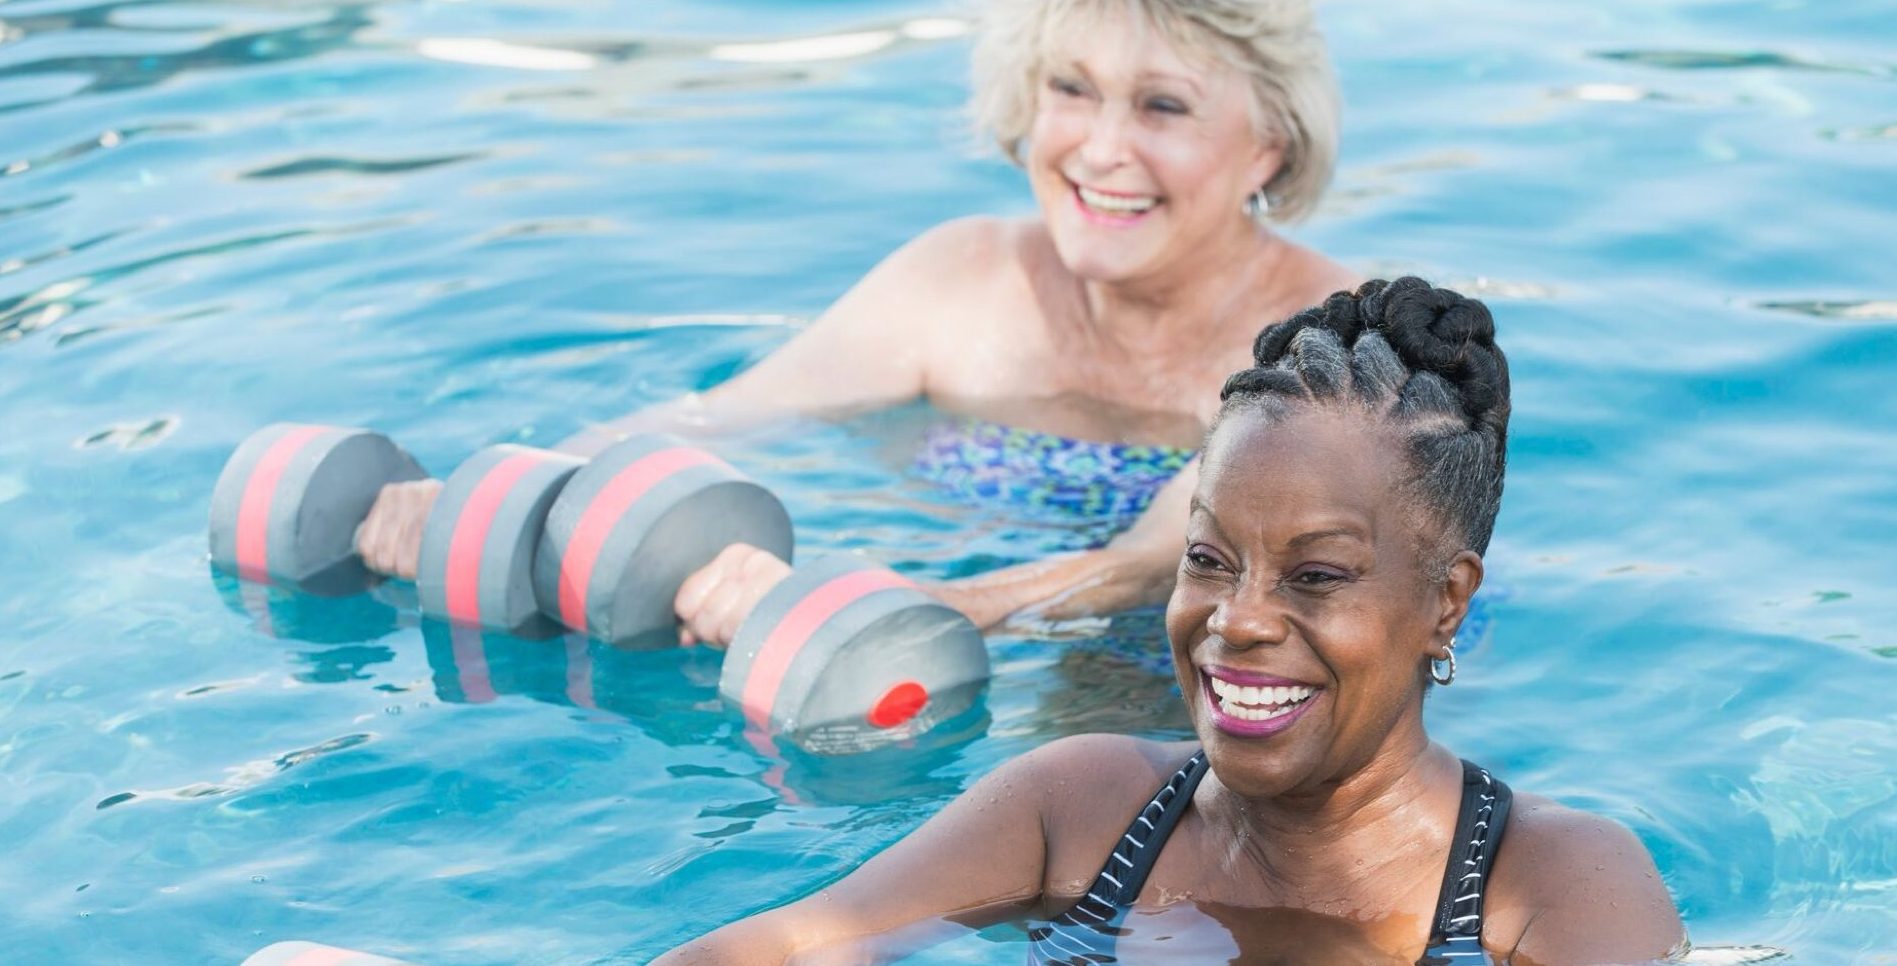 Two women exercising in a pool with dumbbells, promoting fitness and strength training in a refreshing aquatic environment.